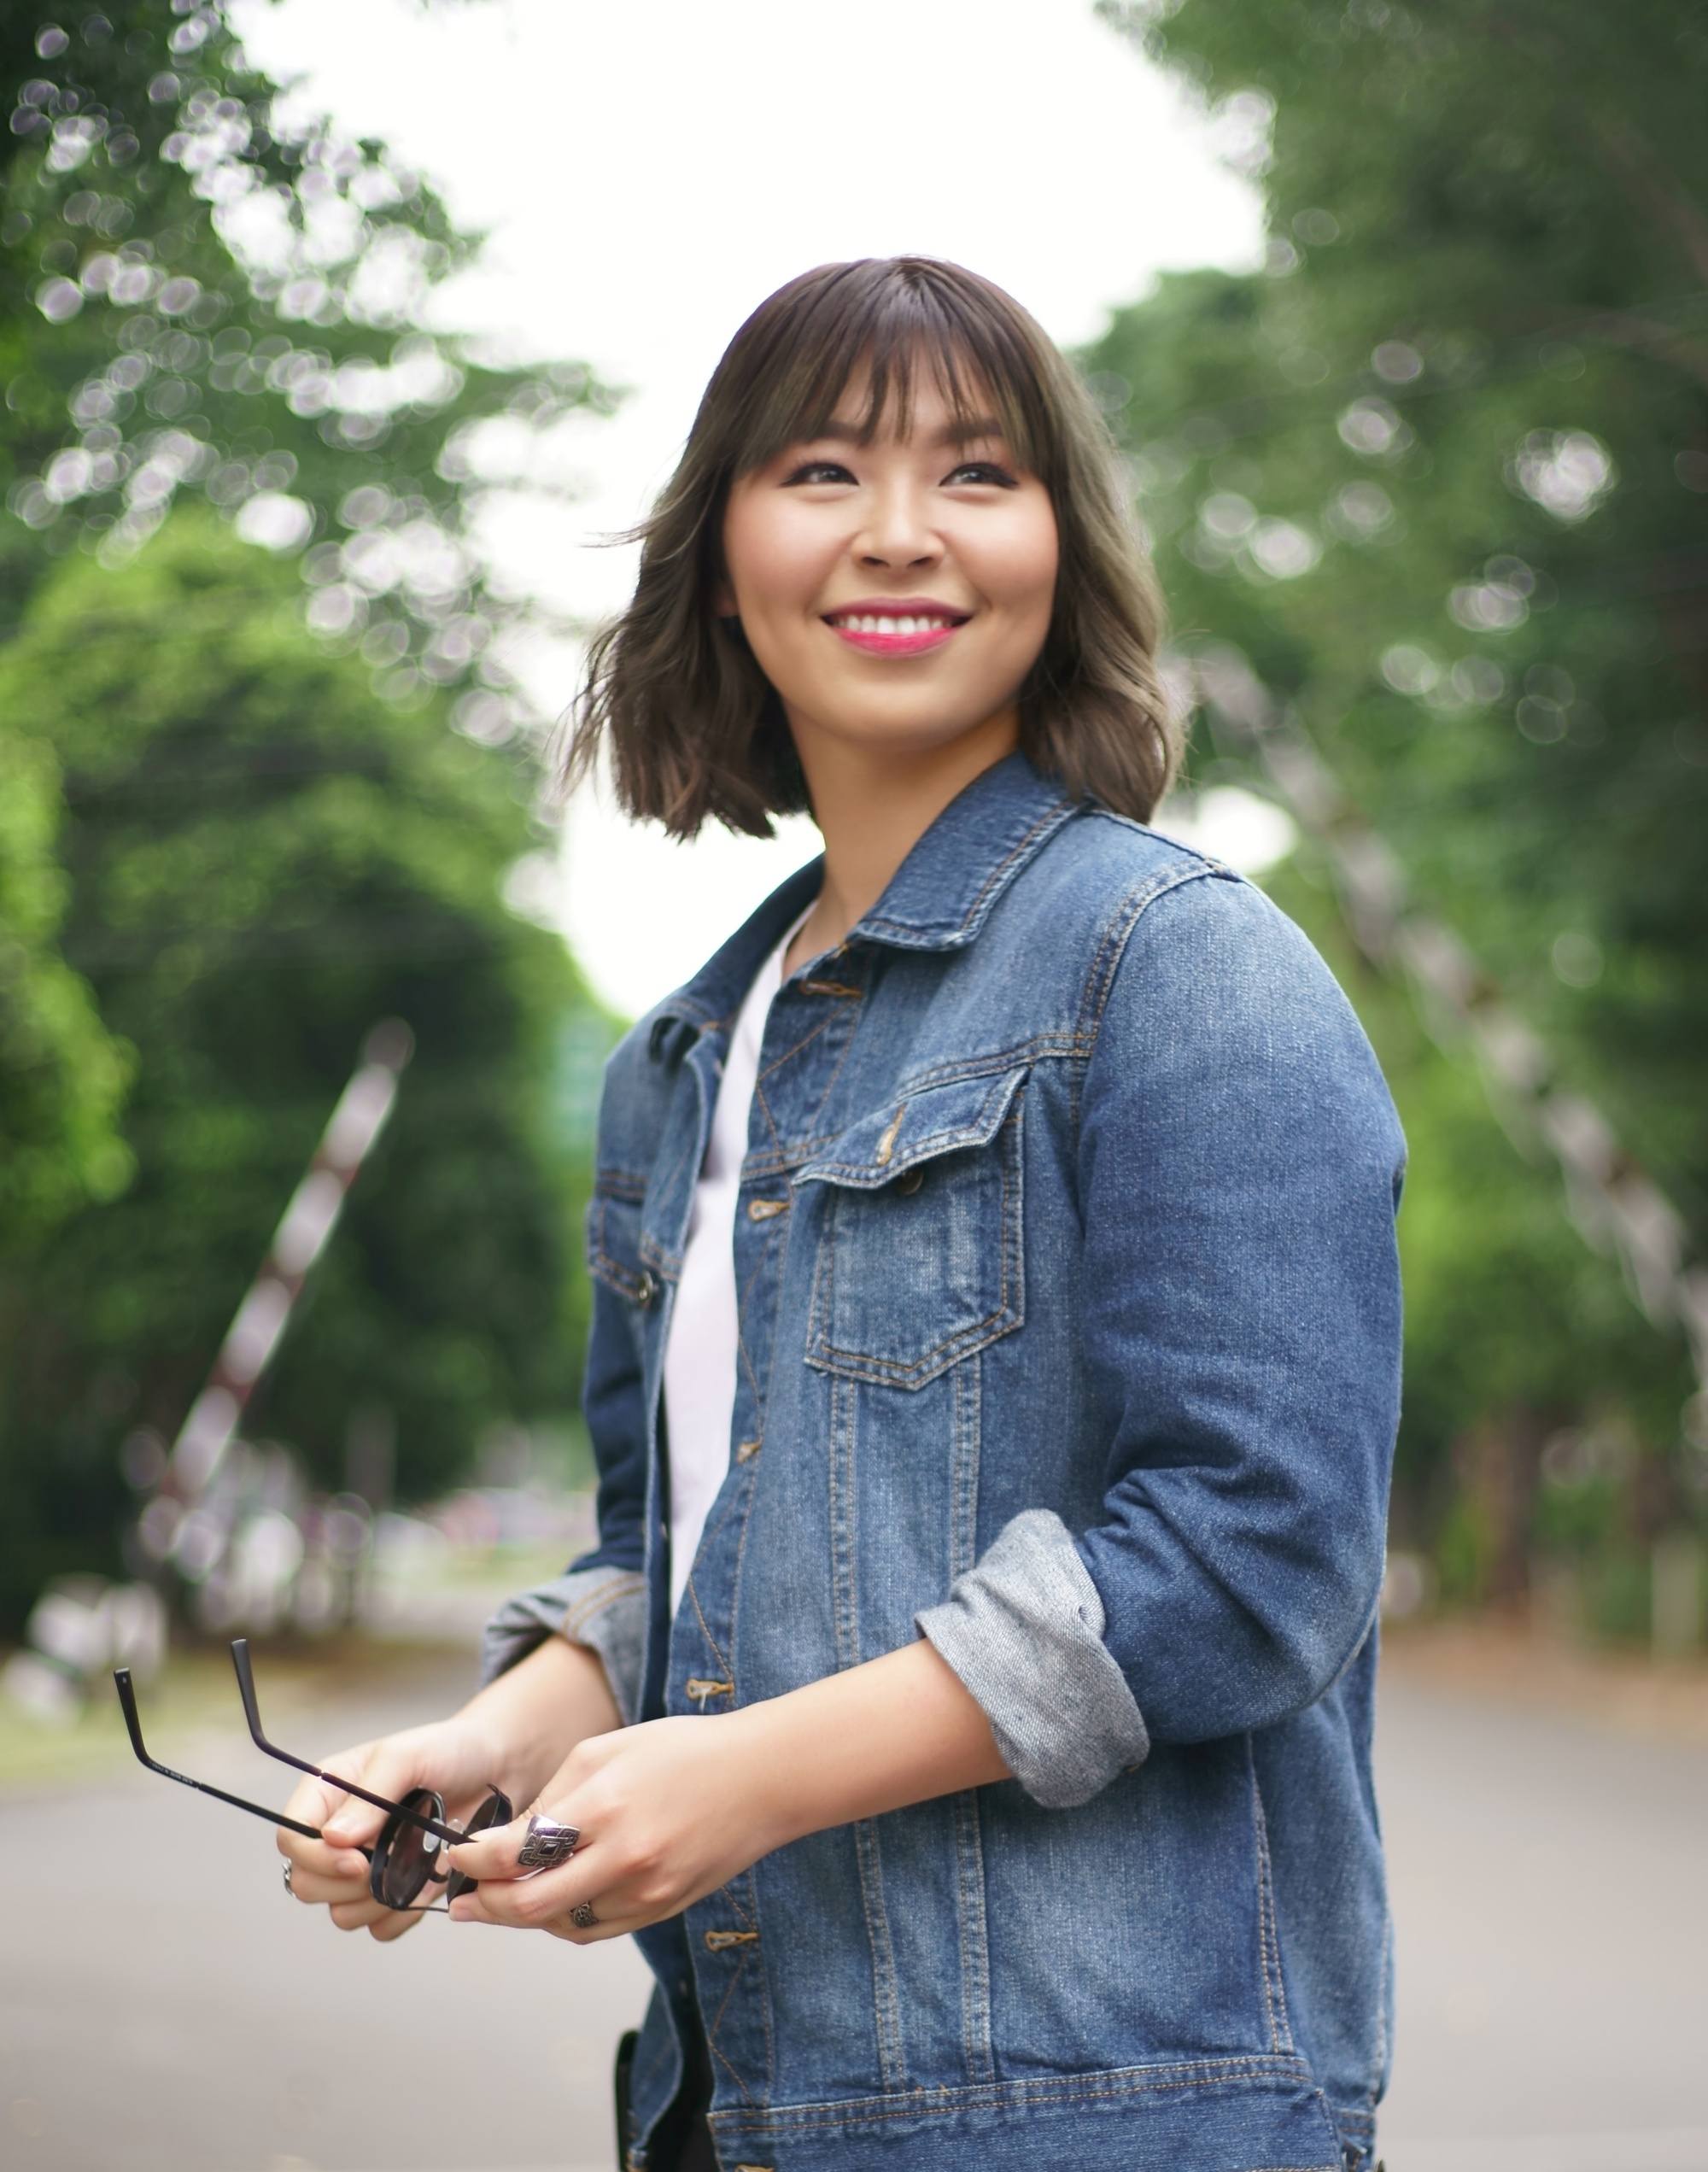 Asian woman with short hair and bangs for round face